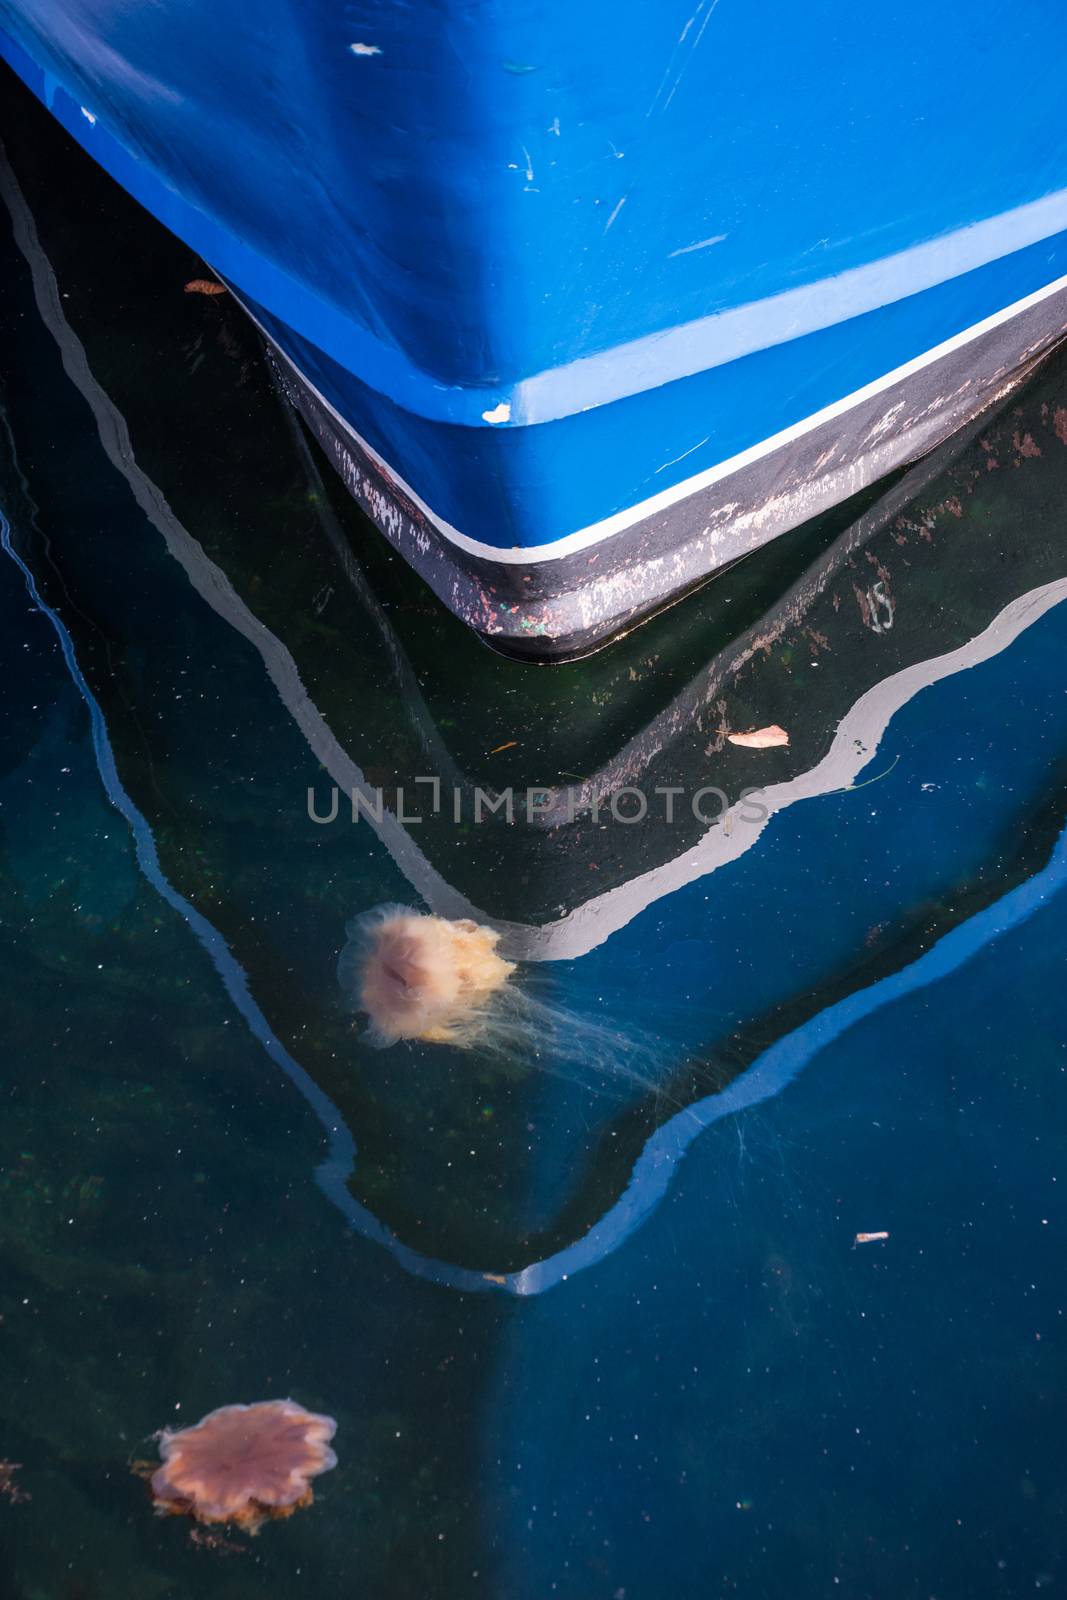 Jellyfish in front of blue boat by MXW_Stock